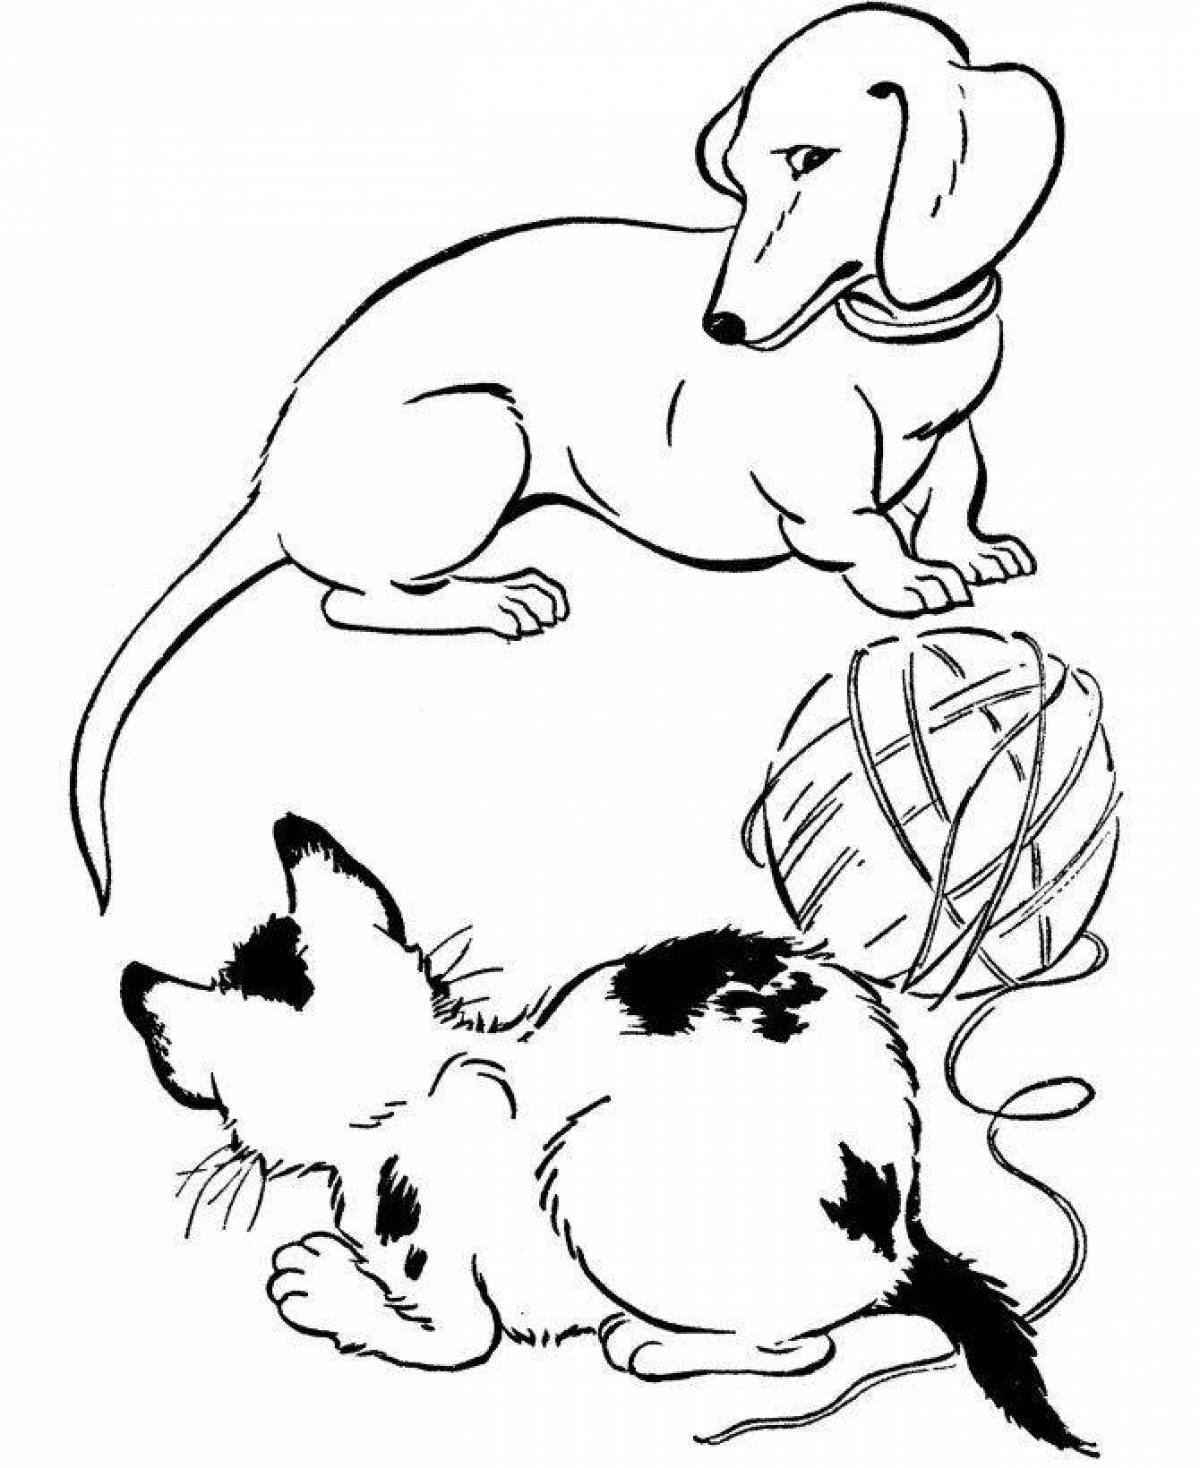 Attractive dog and cat coloring page